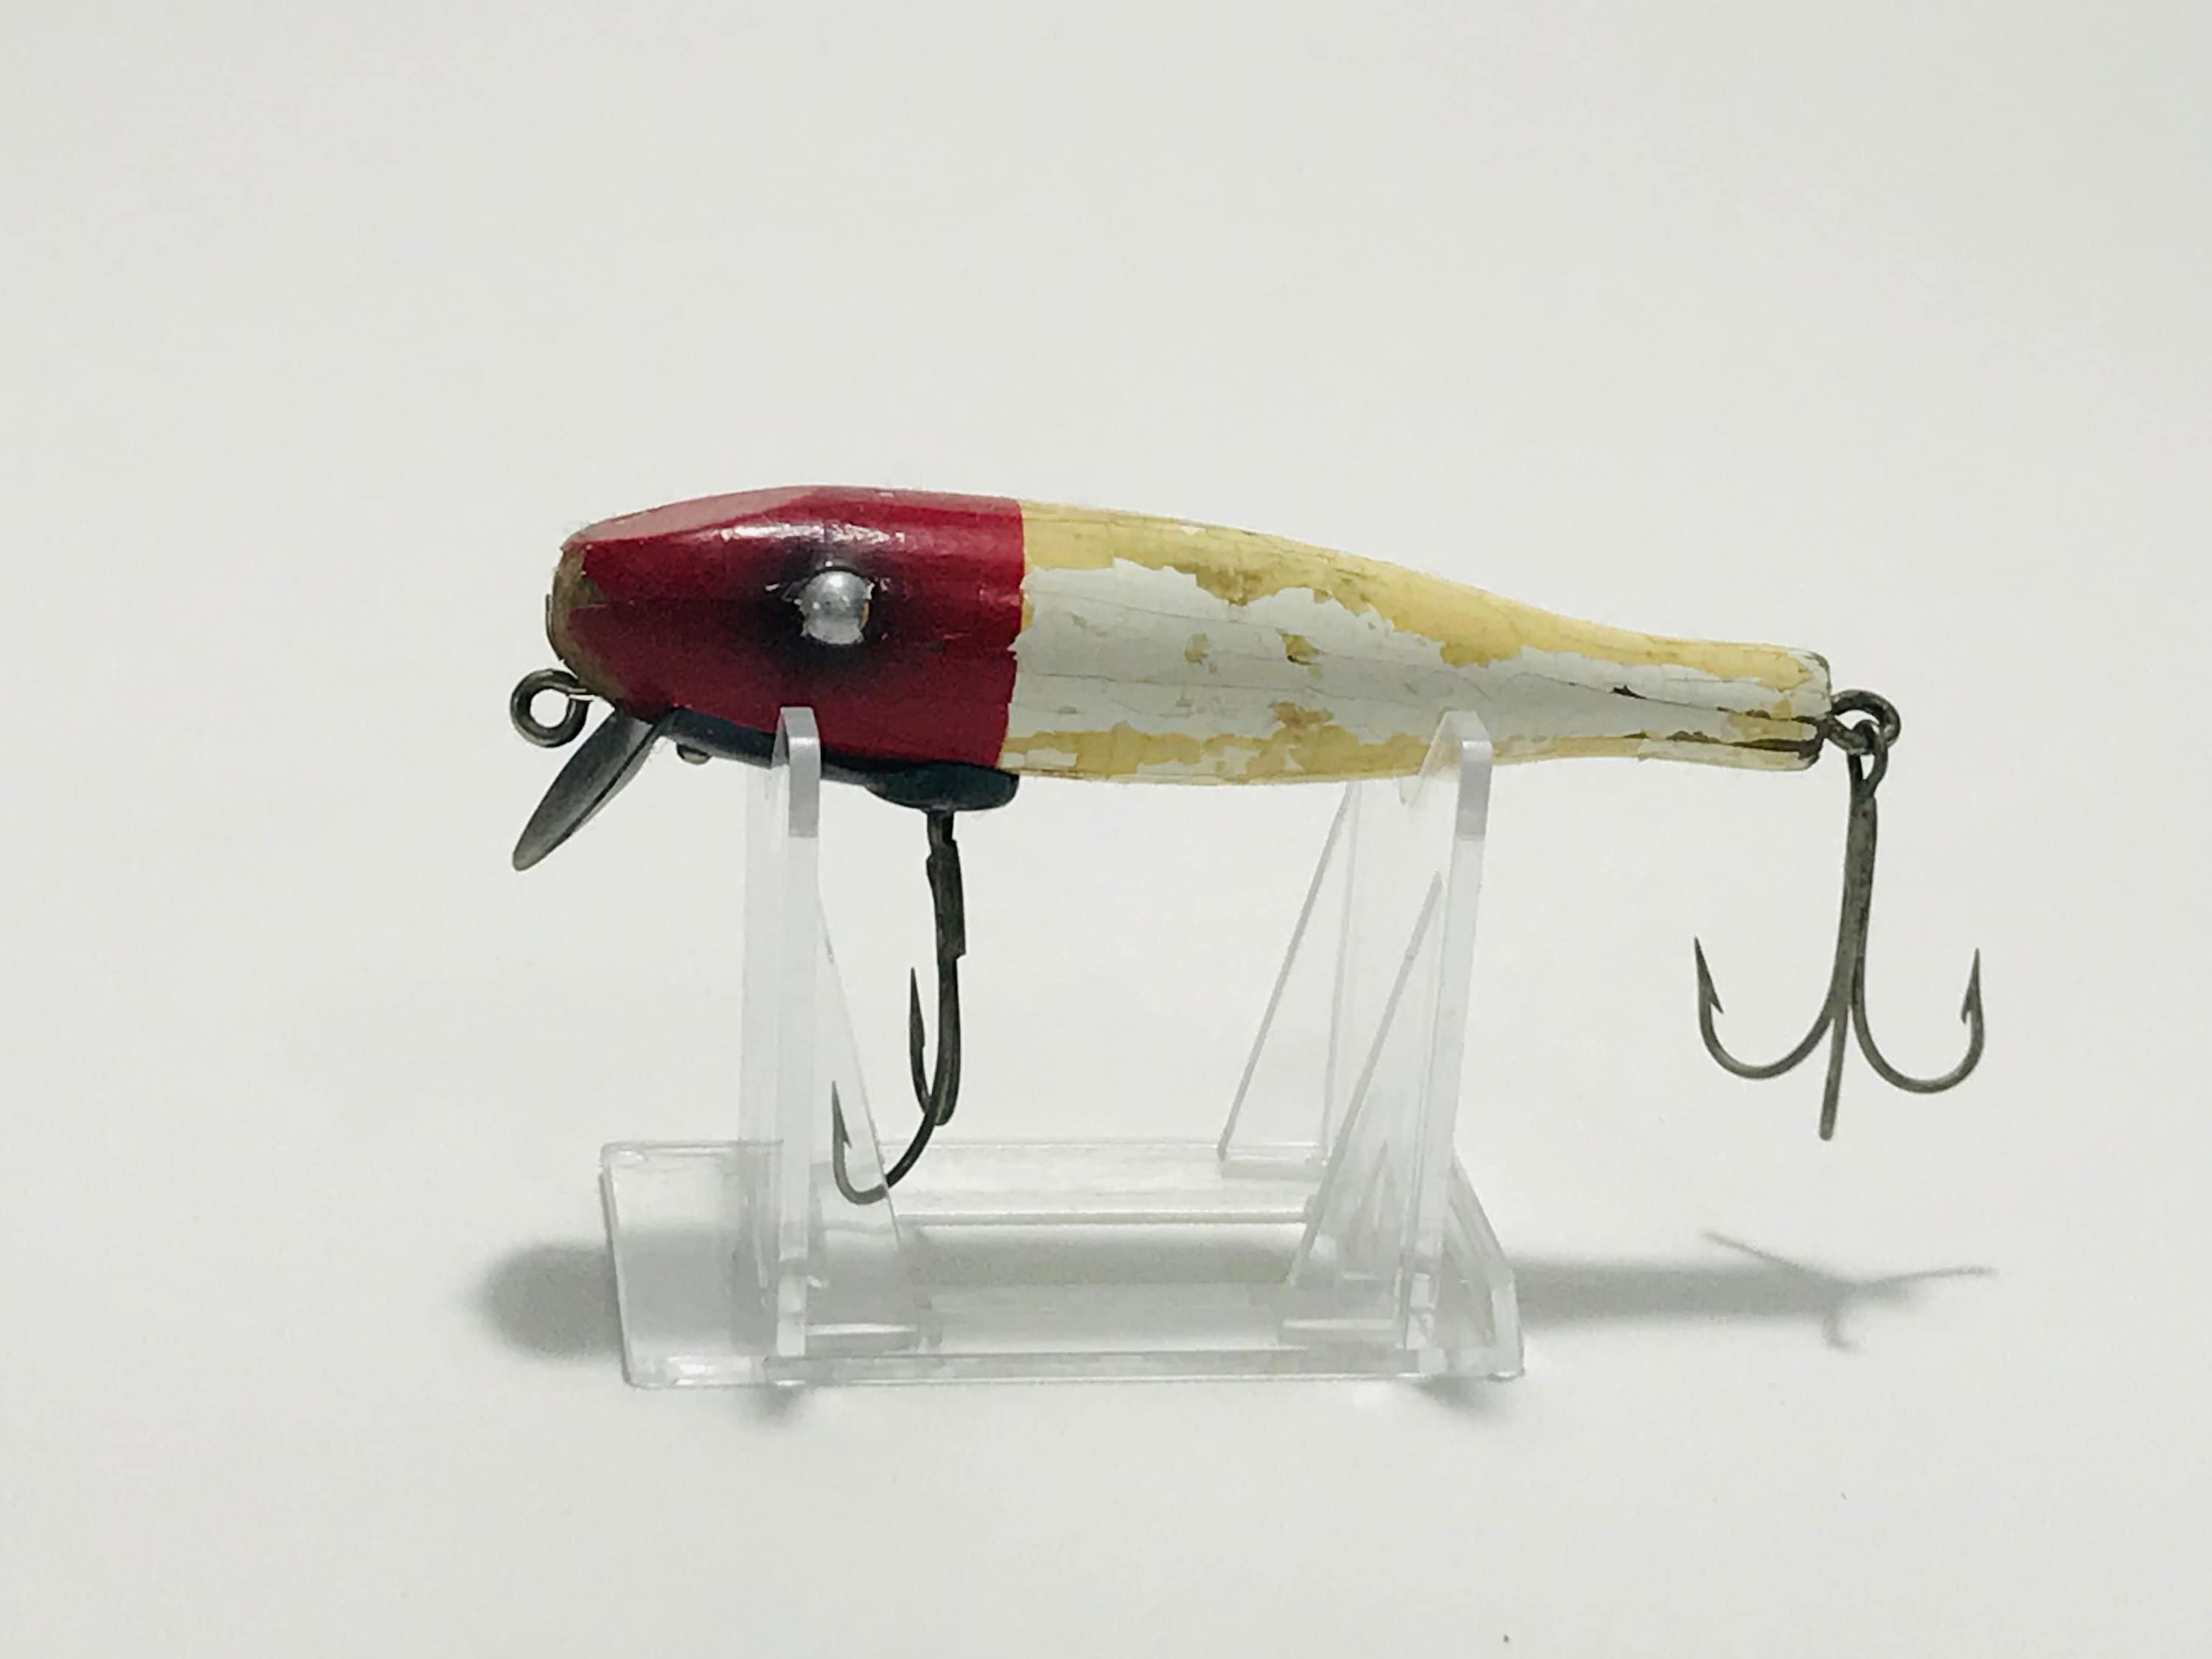 Vtg Paw Paw Pike Fishing Lure Wood Pikie Minnow Bass Fishing Gear  Fishermans Bait and Tackle Box Lure Collection Surface Topwater Fish Decoy  